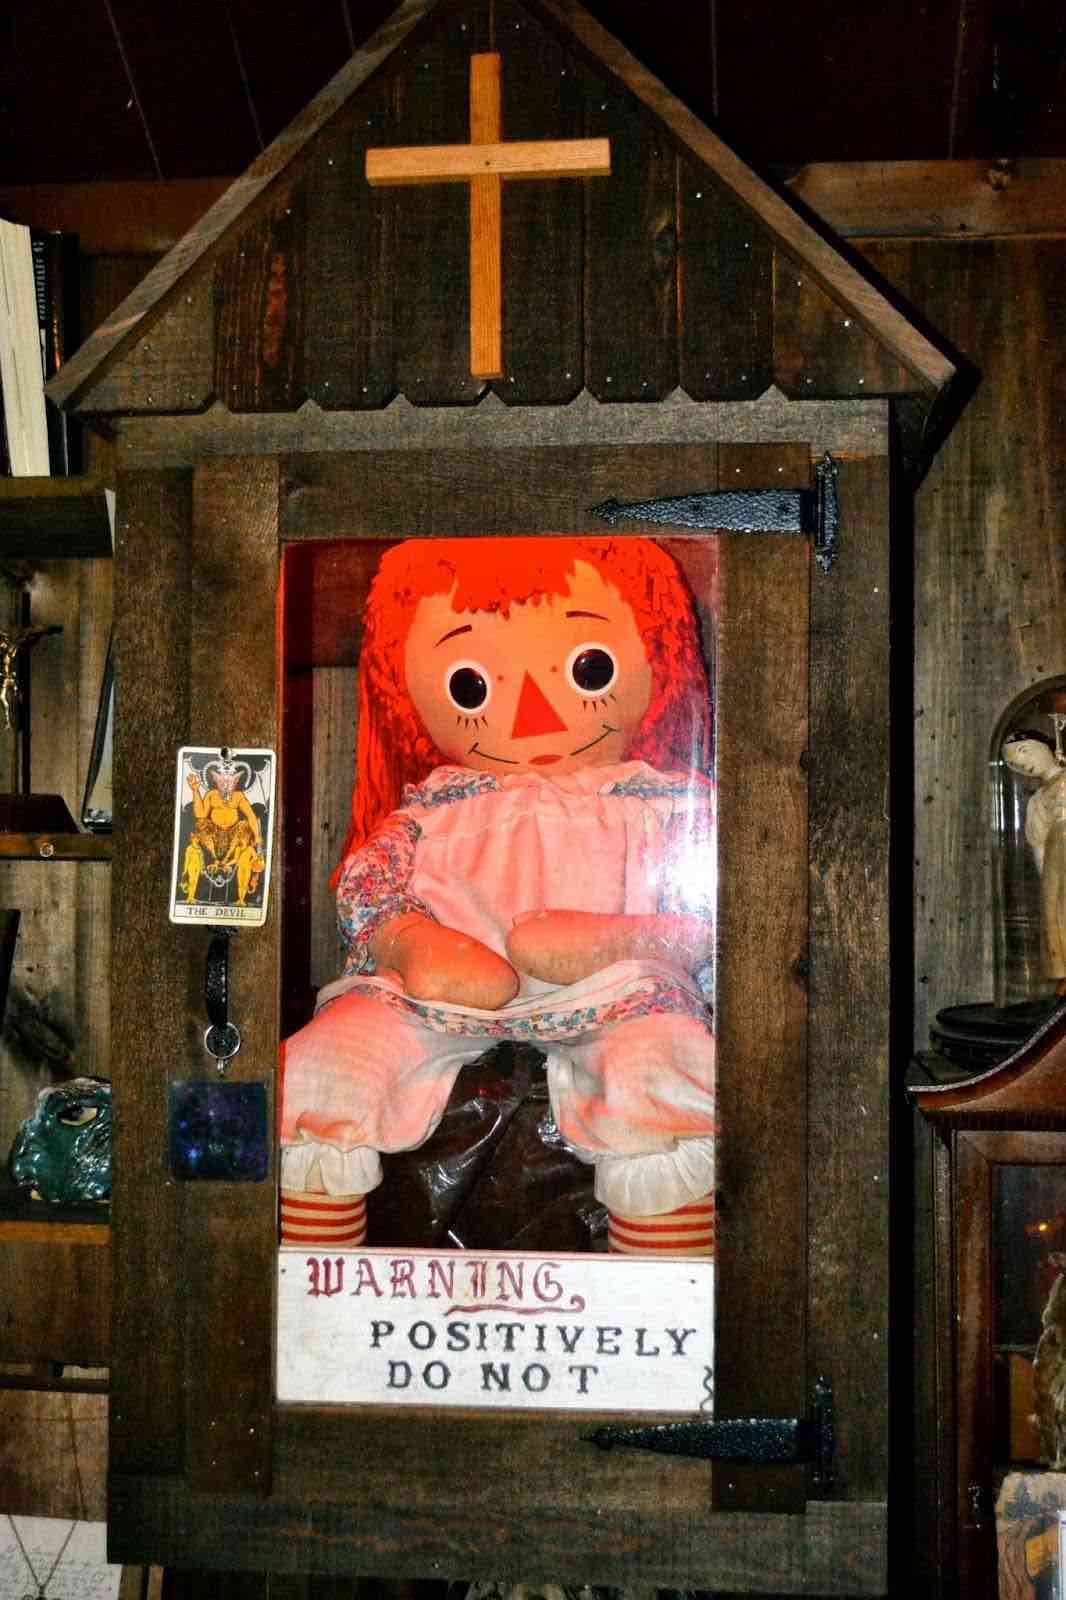 annabelle doll conjuring